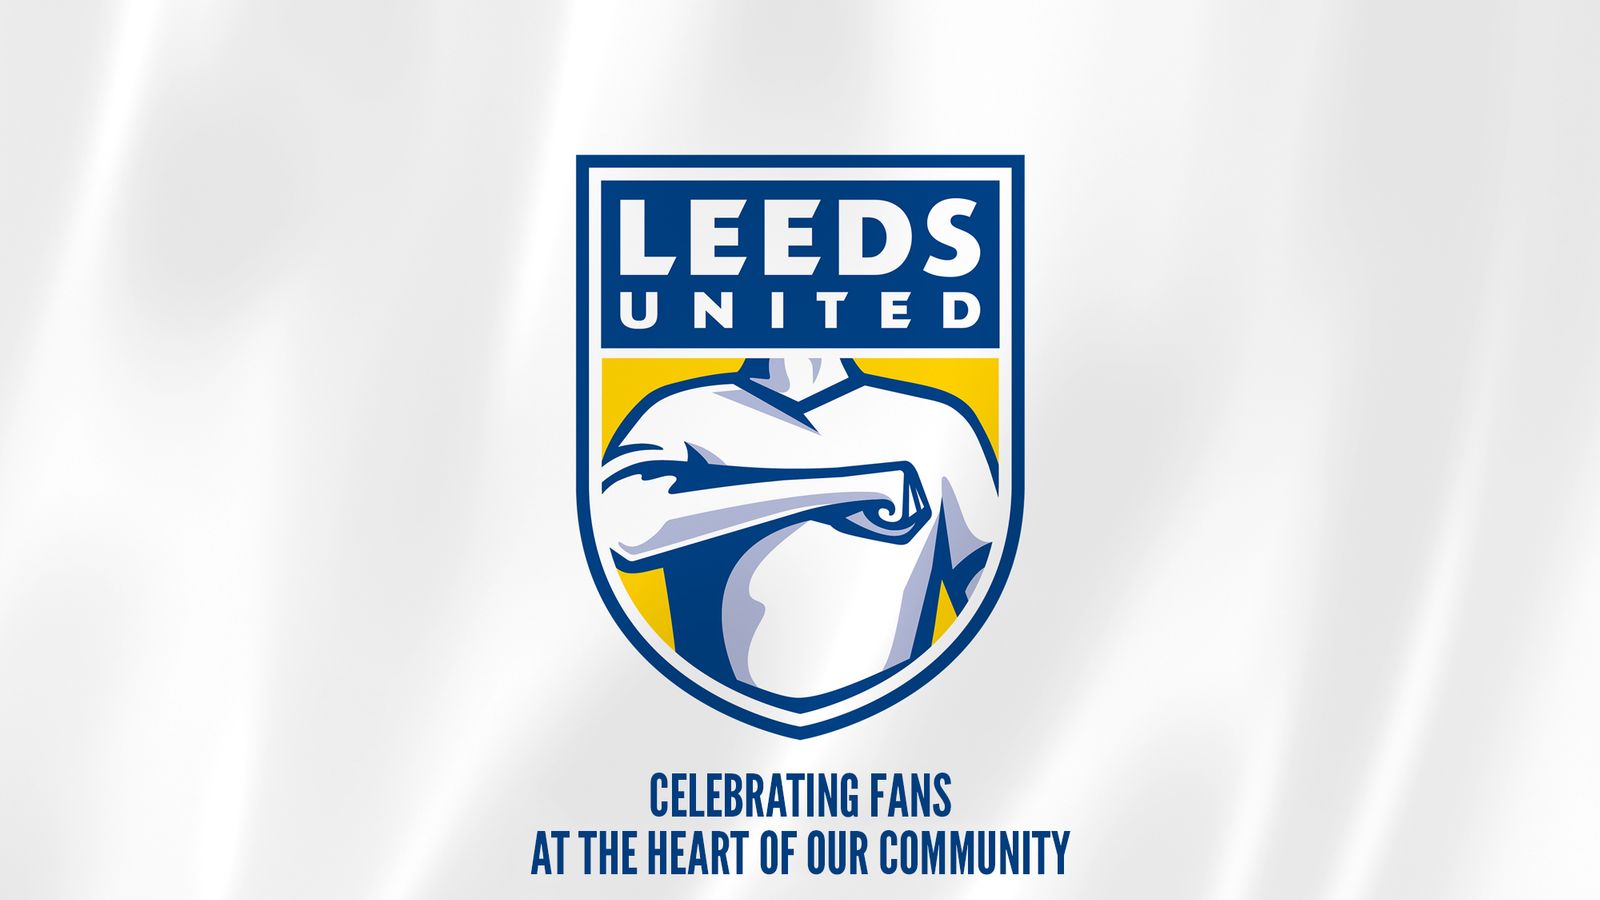 Leeds United to rethink new badge after supporters' dismay | Football ...